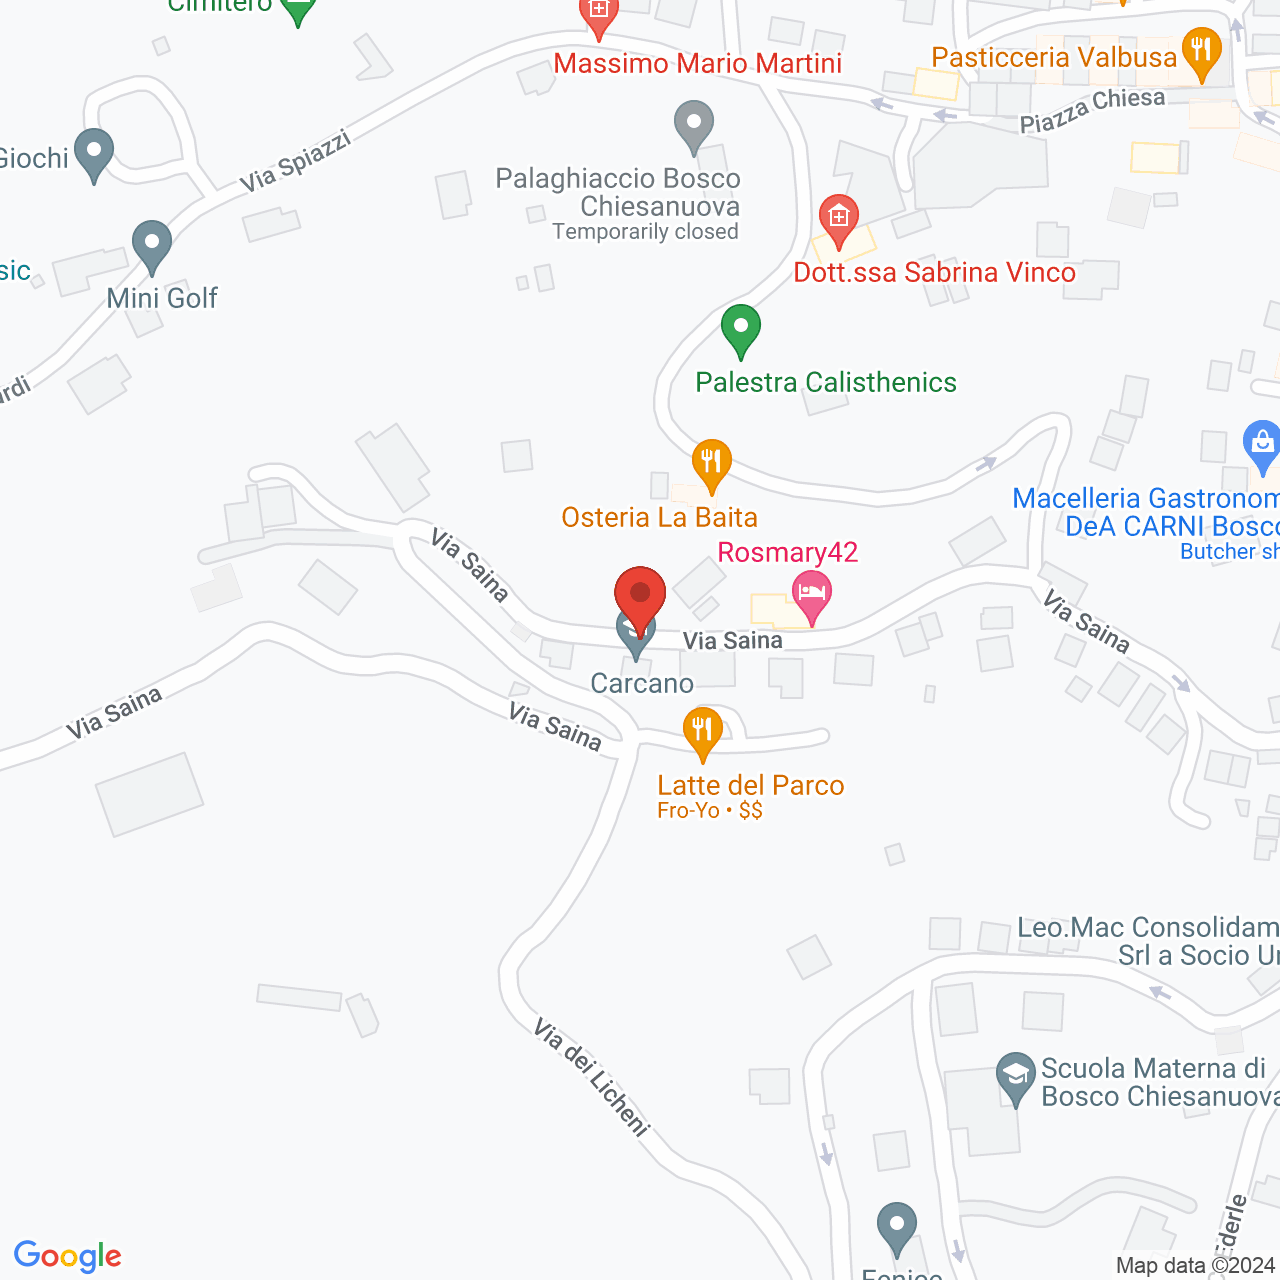 https://maps.googleapis.com/maps/api/staticmap?zoom=10&maptype=hybrid&scale=4&center=45.6201376,11.0270741&markers=color:red%7C%7C45.6201376,11.0270741&size=1000x1000&key=AIzaSyAQg6Liu52-a7wn17F9B-5c4QmJ9kTO3Mo